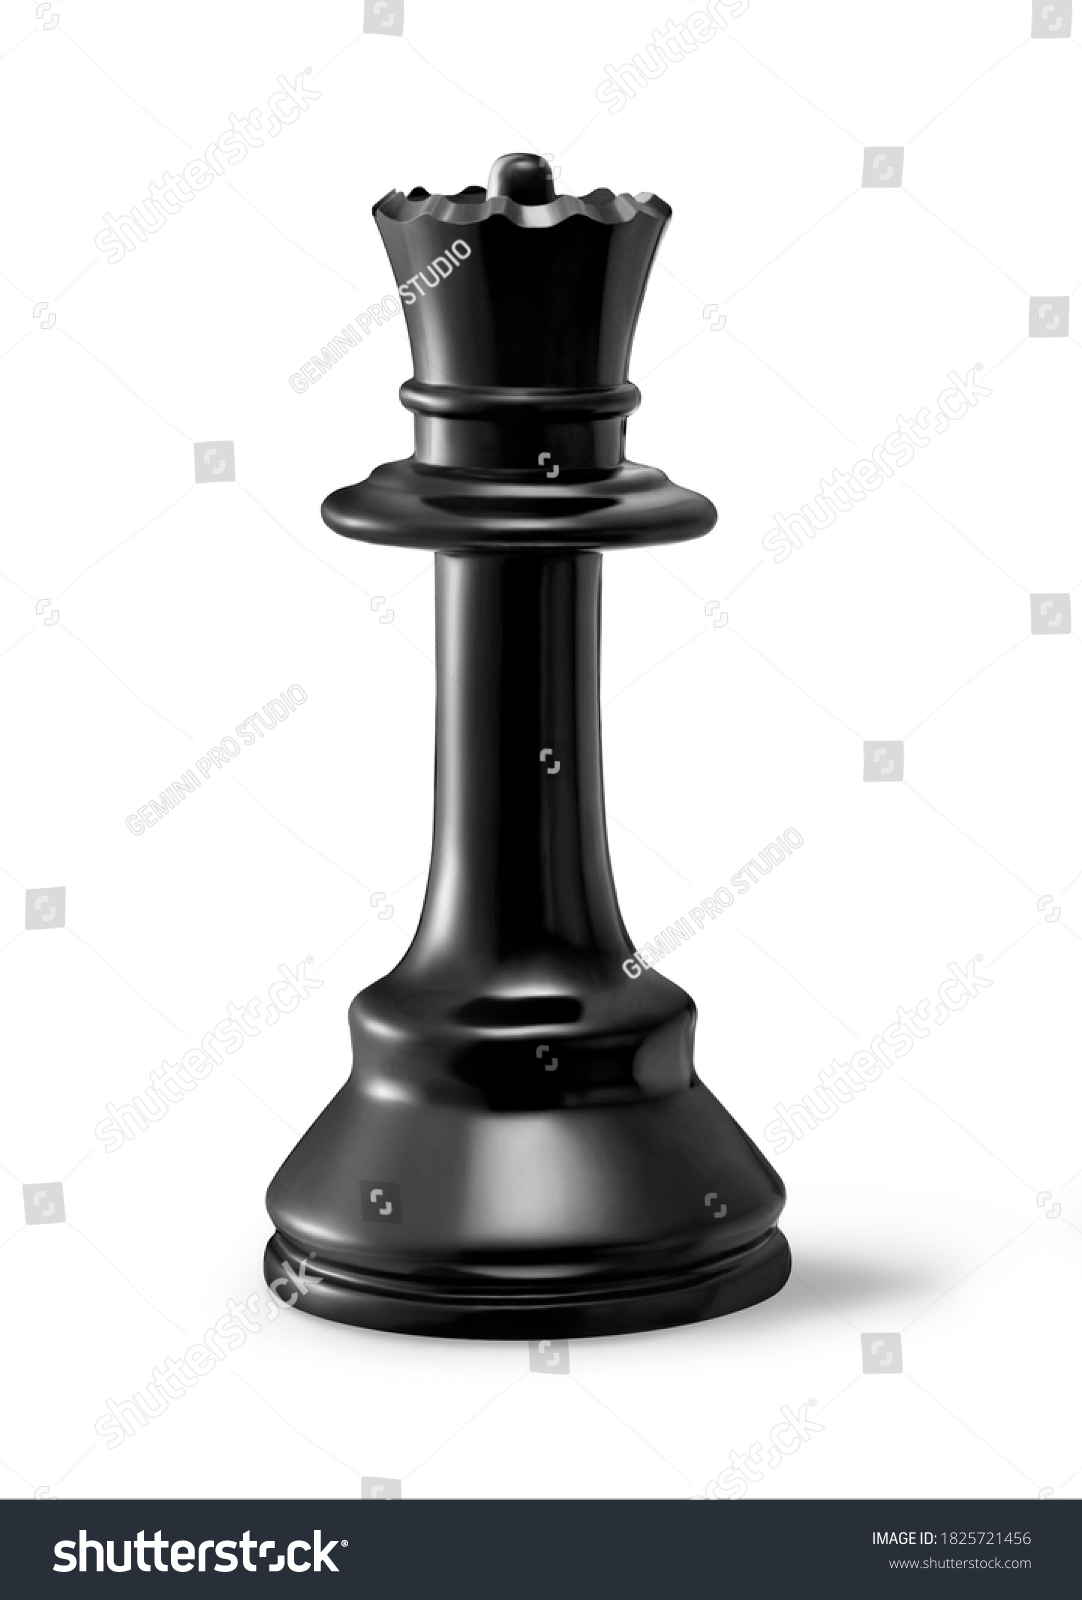 royal Chess queen black image isolated on white background #1825721456